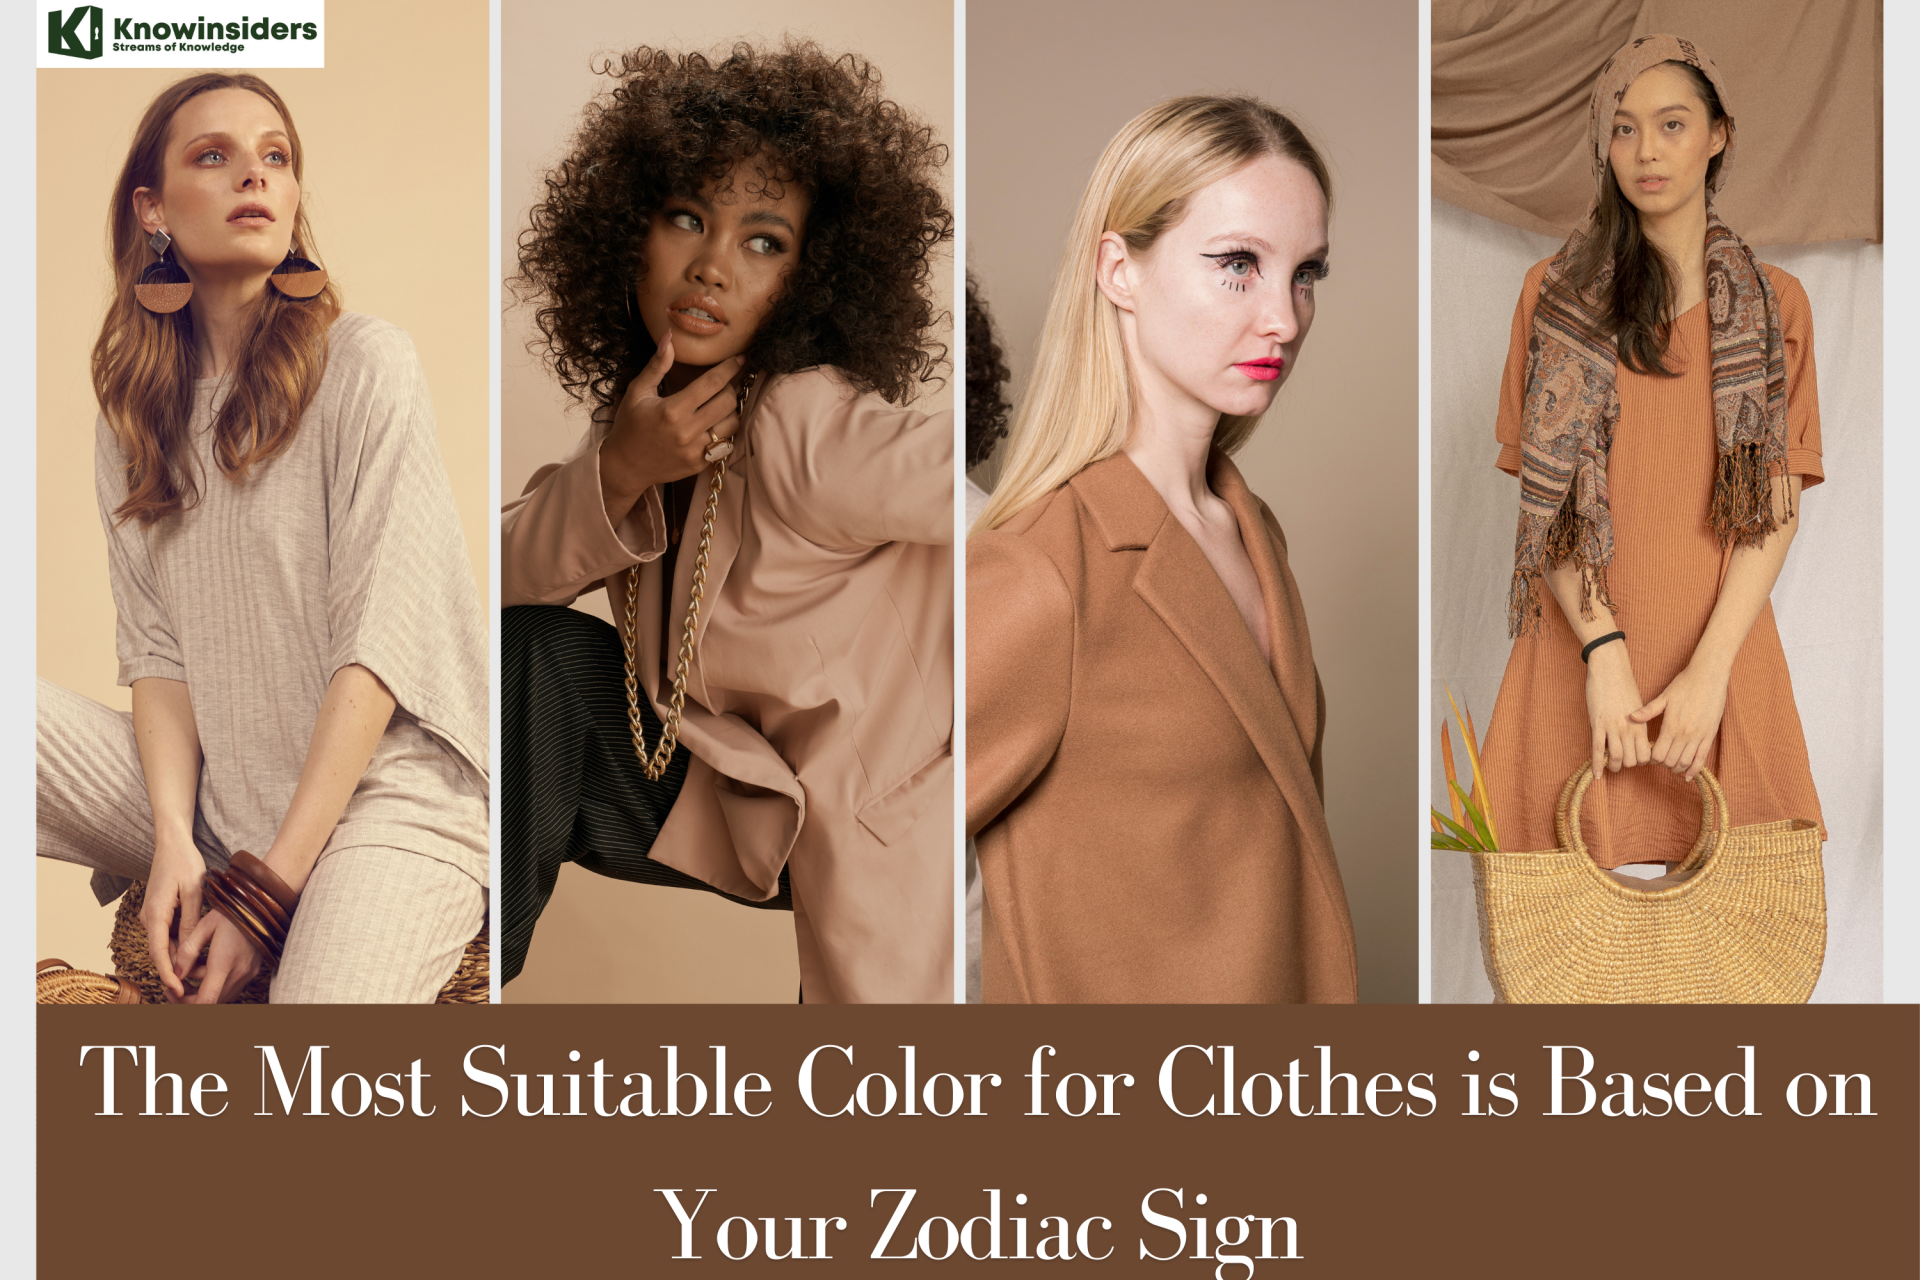 The Most Suitable Color for Clothes is Based on Your Zodiac Sign